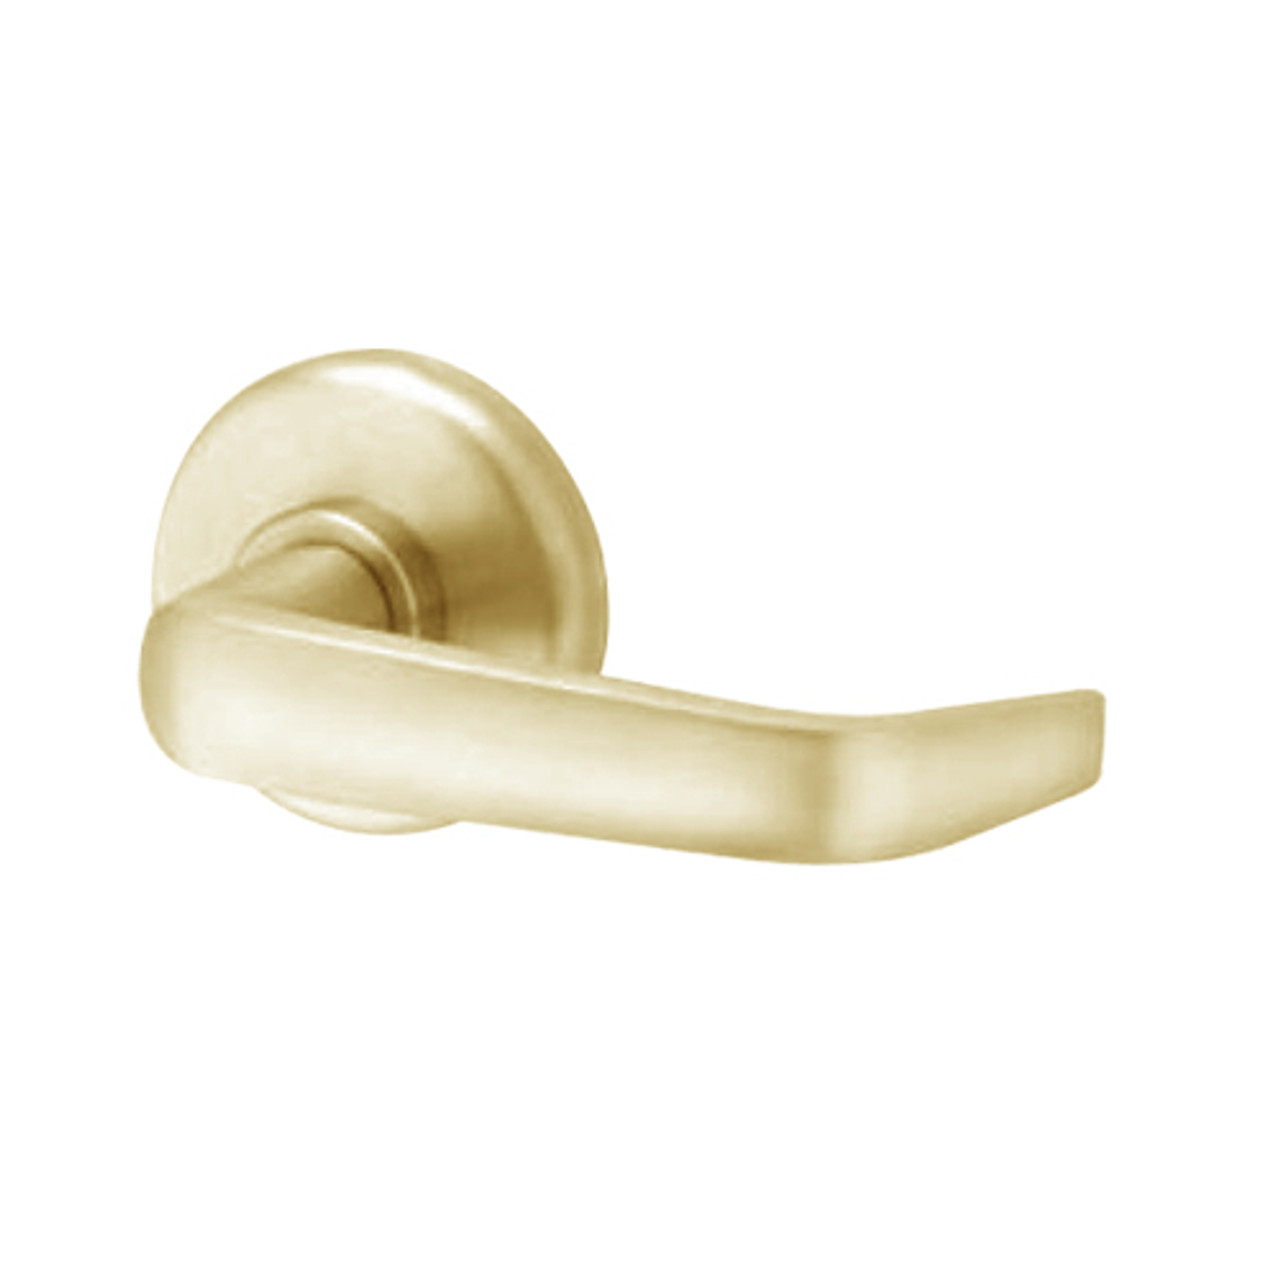 40HTKOS215H606 Best 40H Series Trim Kits Outside Lever w/ Cylinder with Contour w/ Angle Return Style in Satin Brass